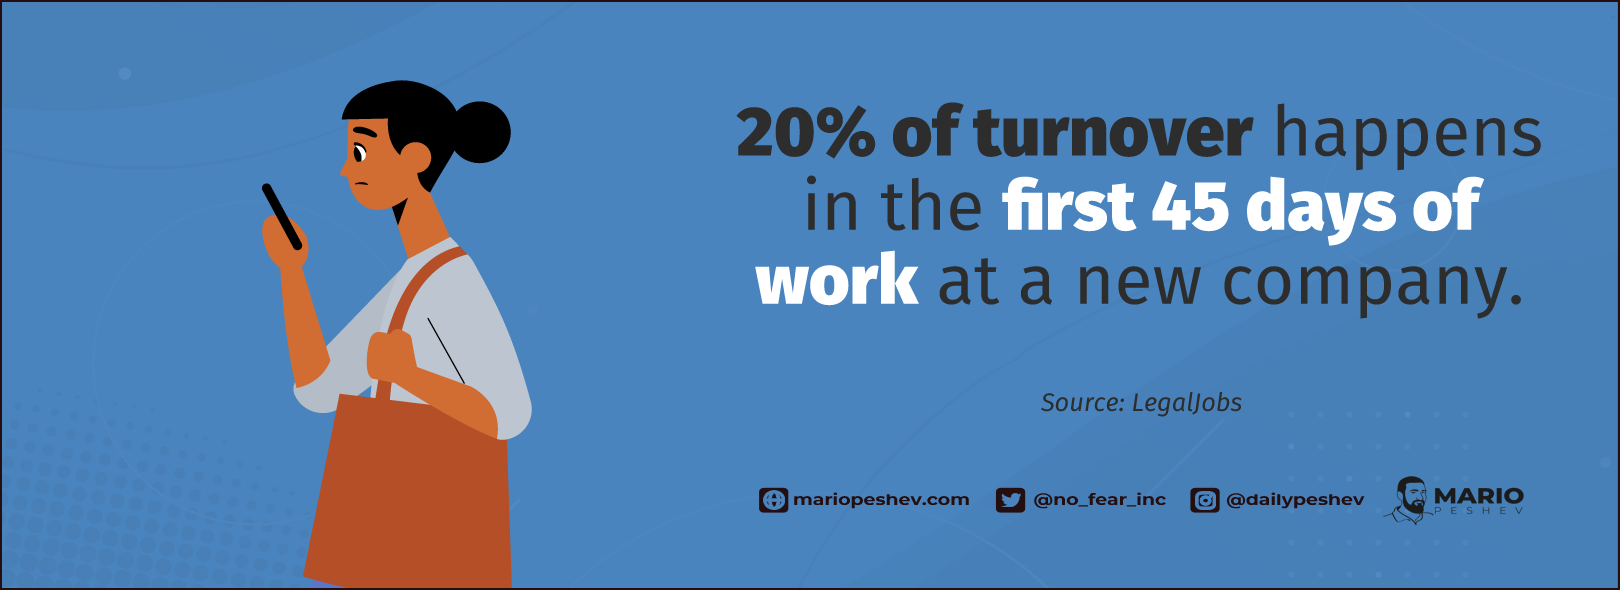 20% of employee turnover happens in the first 45 days of work at a new company.